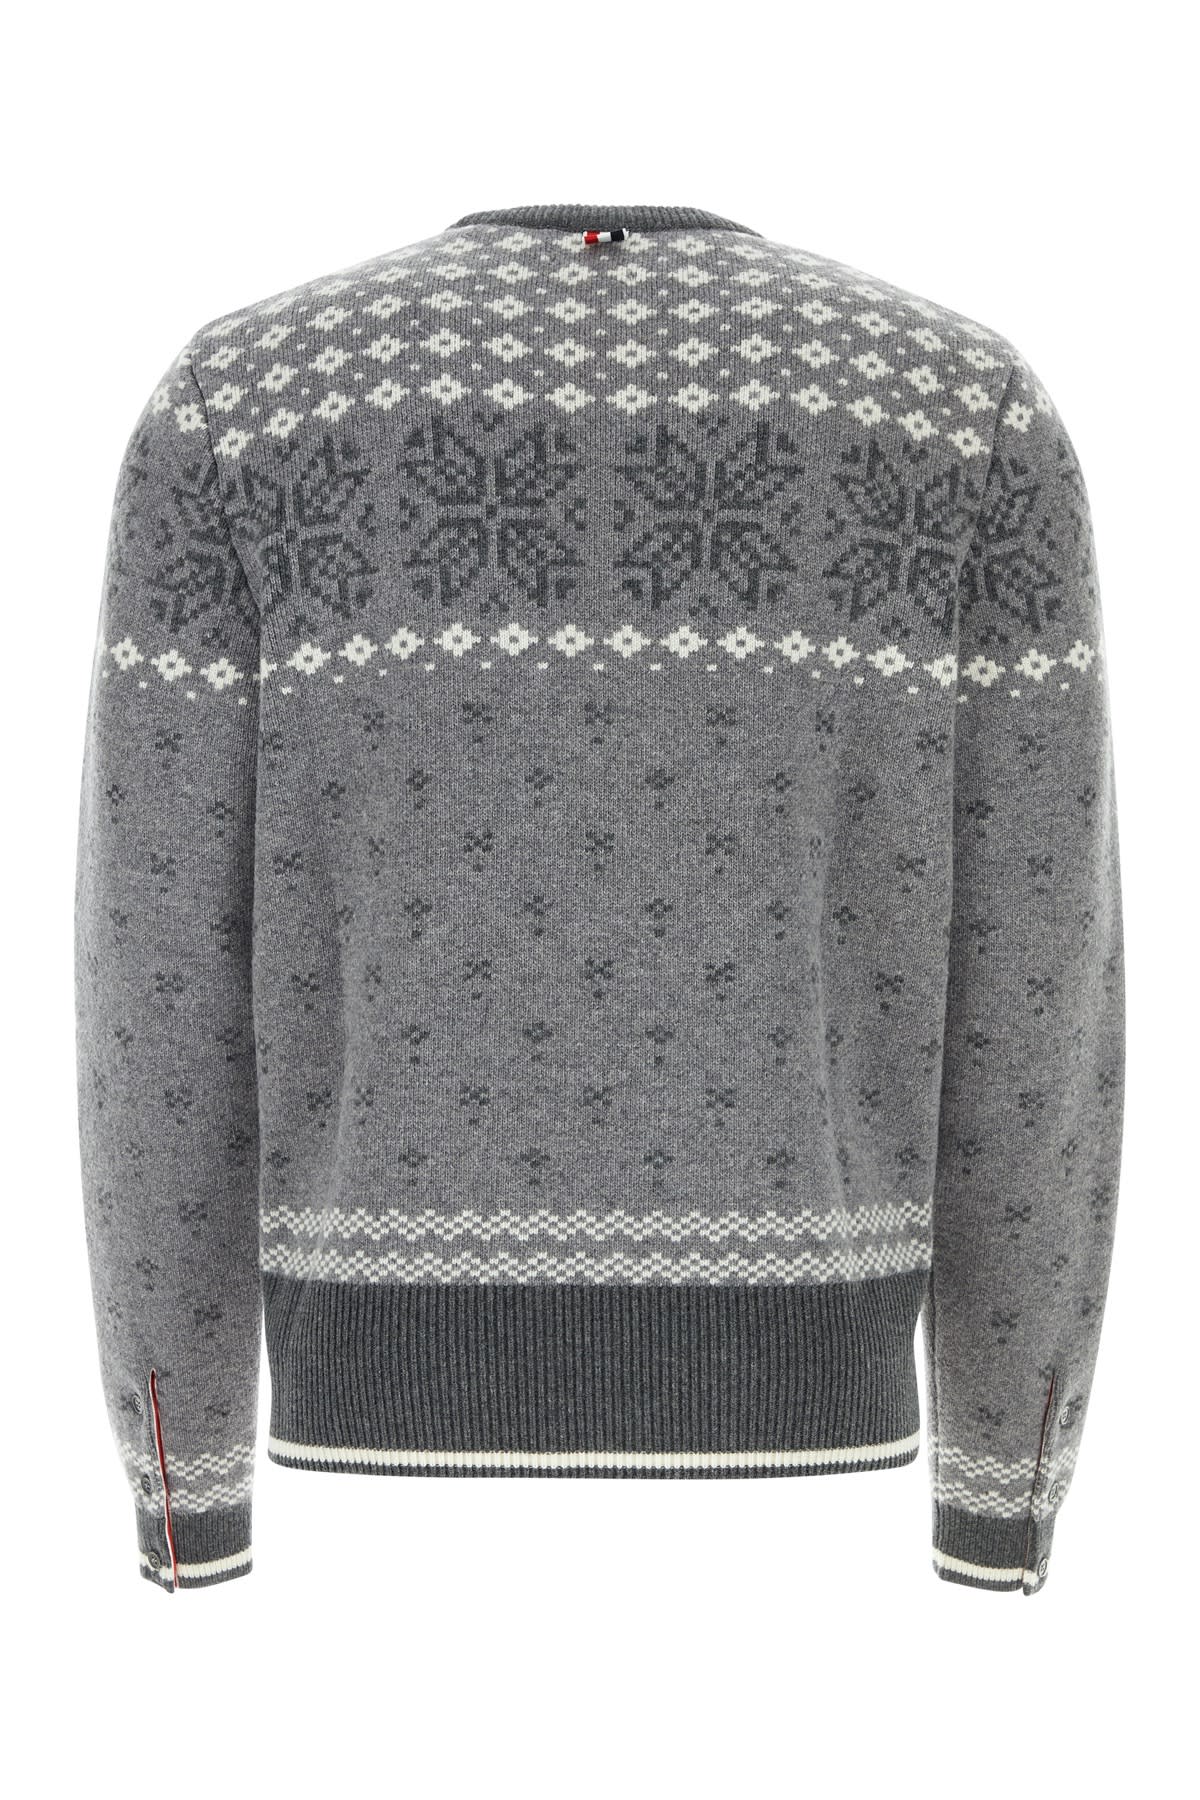 Thom Browne Embroidered Wool Sweater In Tonalgrey